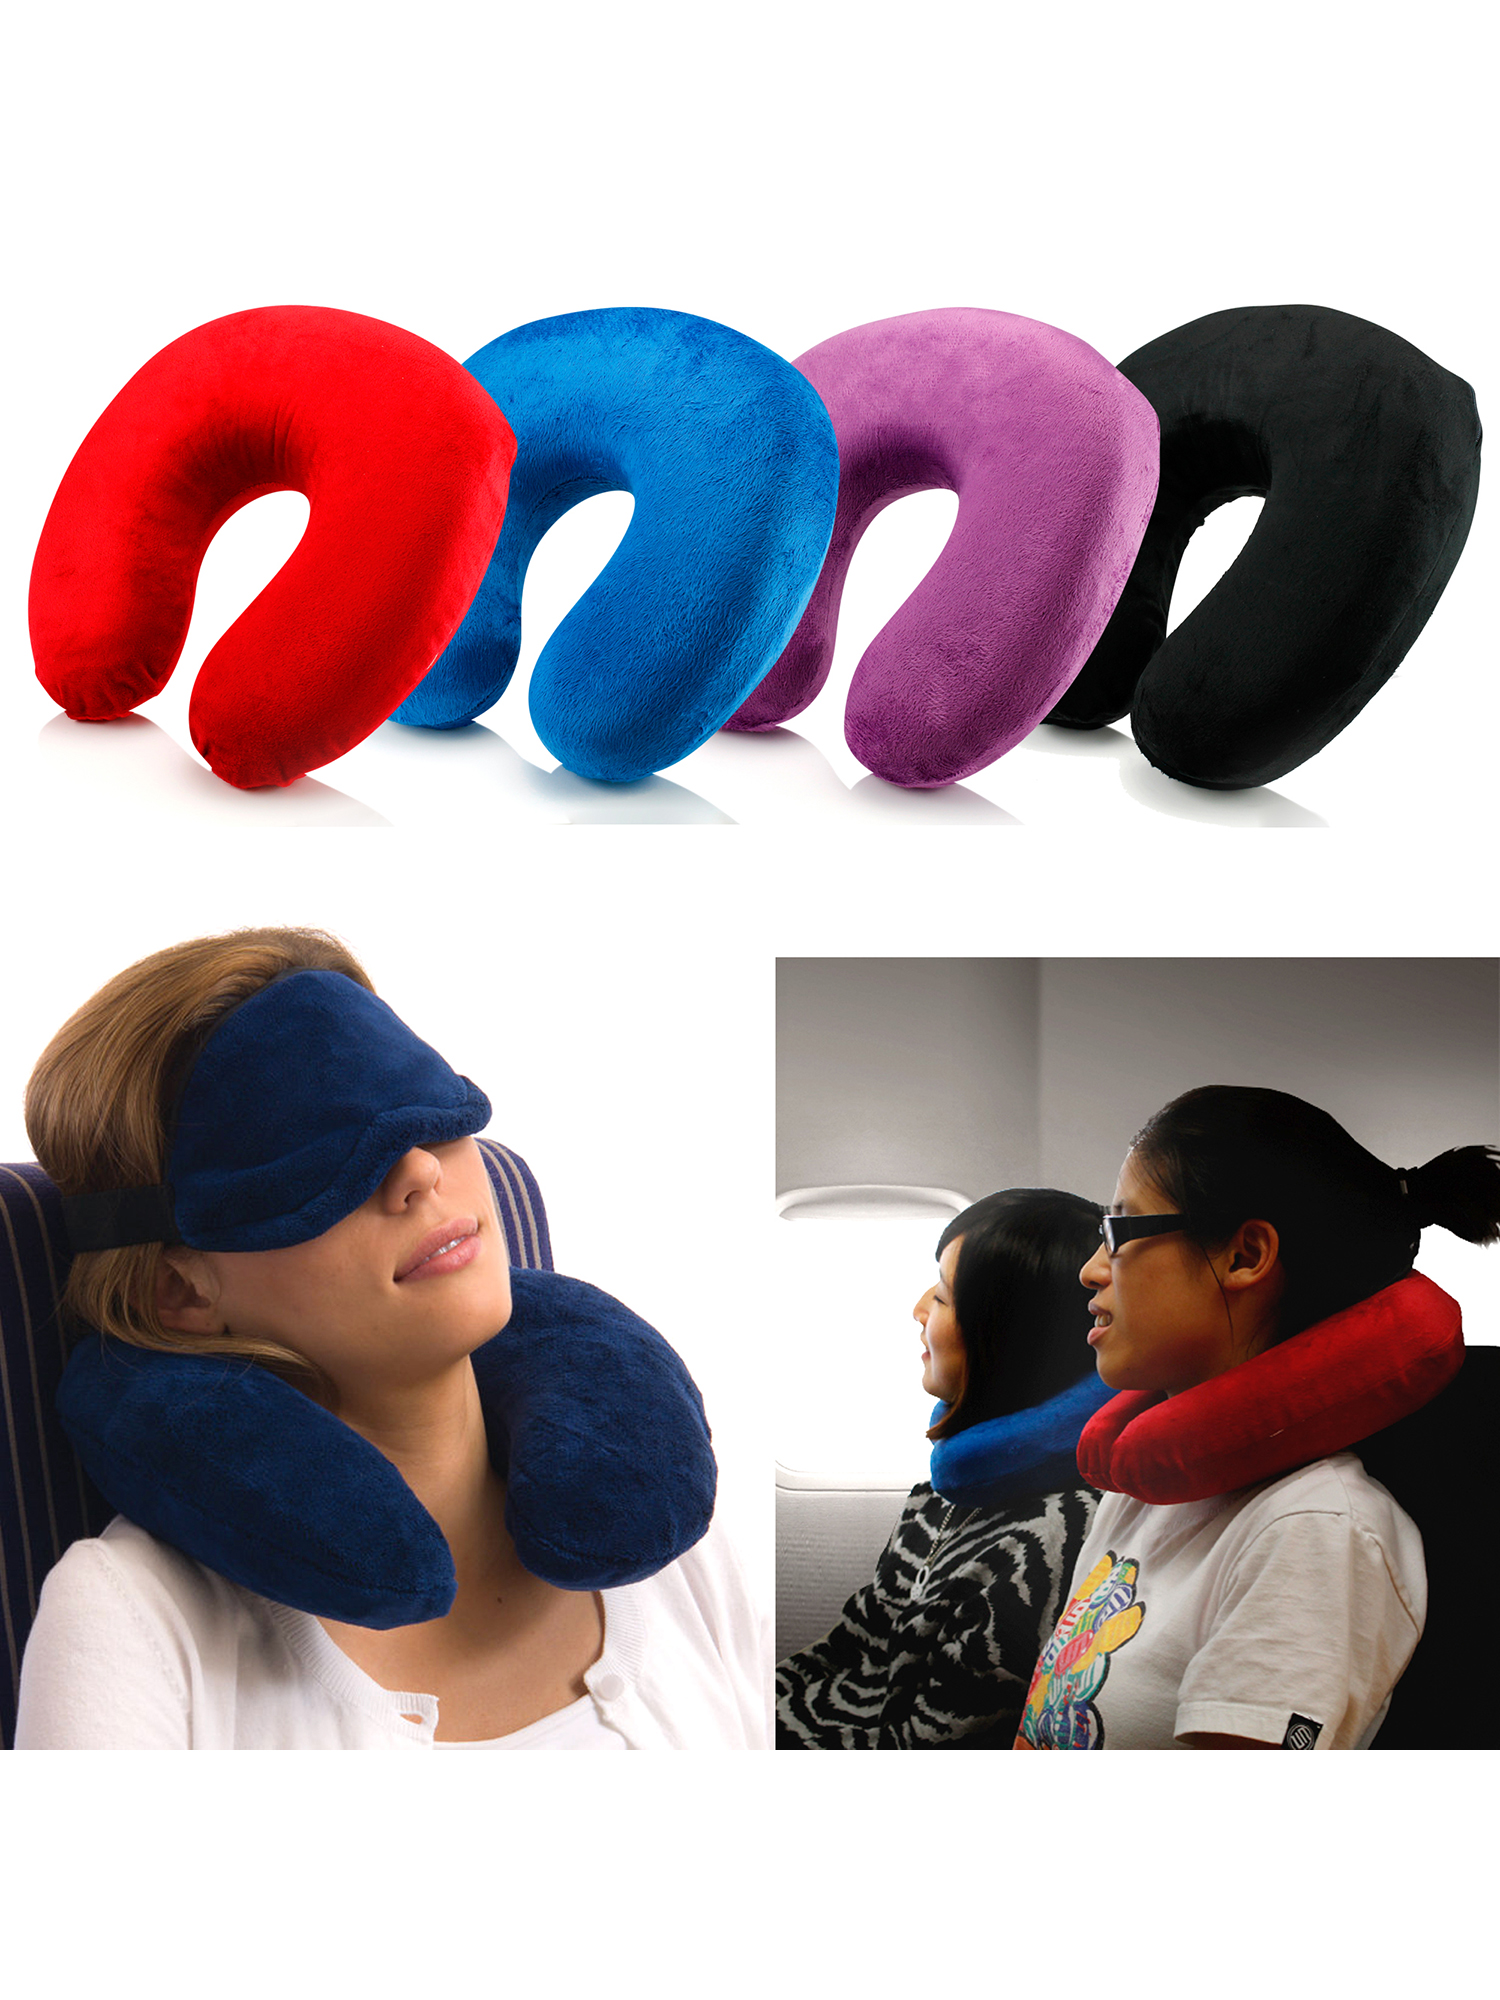 Travel Pillow Memory Foam Neck Cushion Support Rest Outdoors Car Flight - image 2 of 5